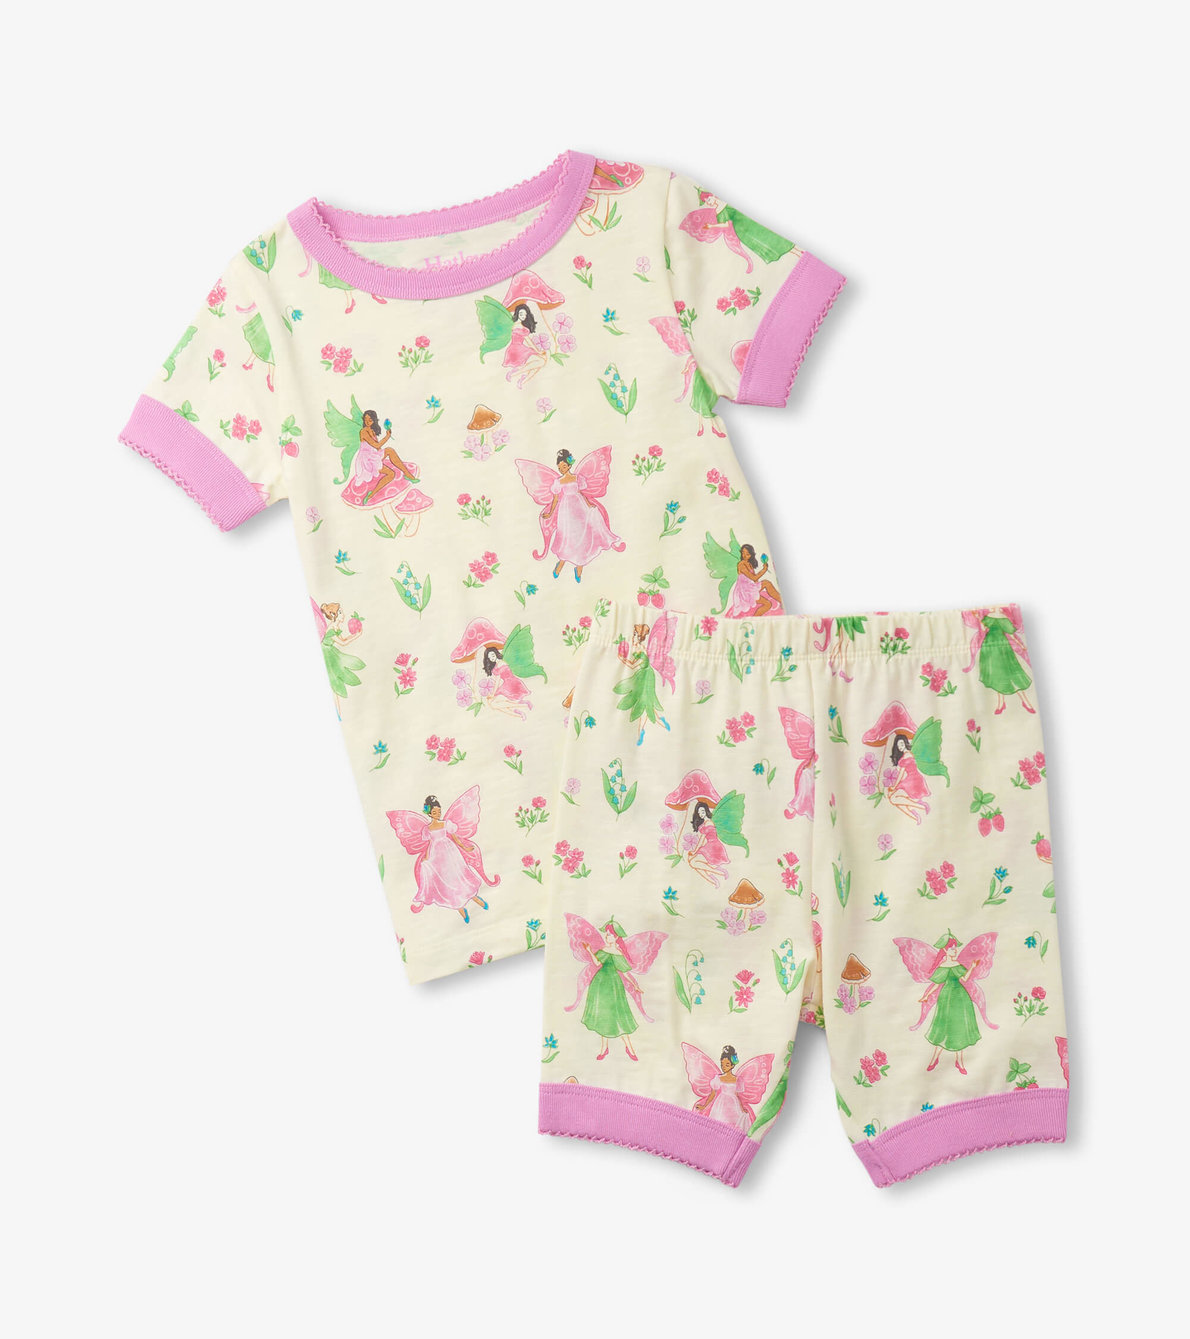 View larger image of Girls Forest Fairies Short Pajama Set